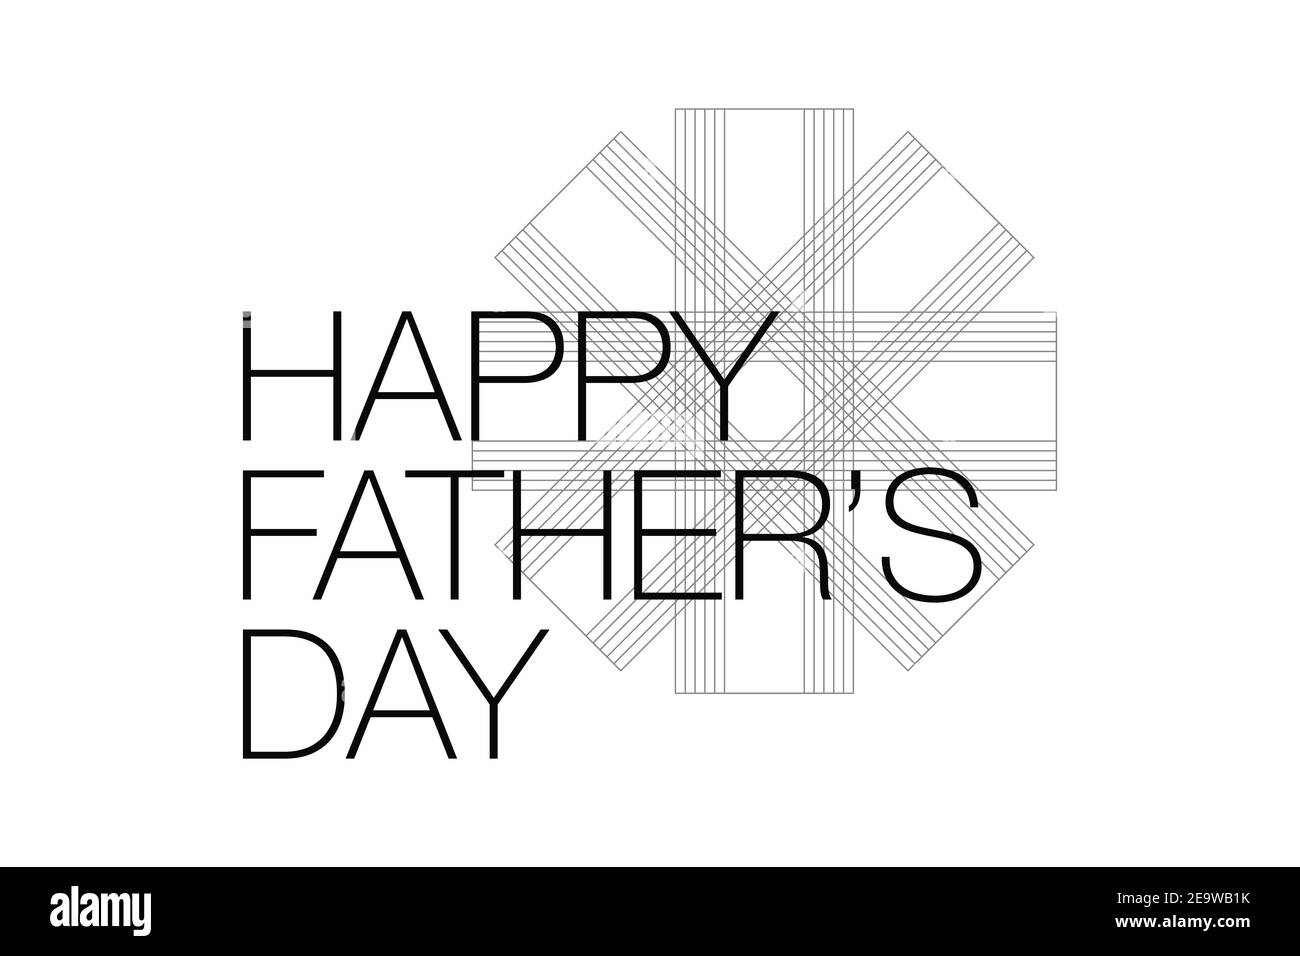 Modern, simple graphic design of a saying 'Happy Father's Day' with lines forming geometric shapes in masculine flower abstraction. Elegant, urban typ Stock Photo